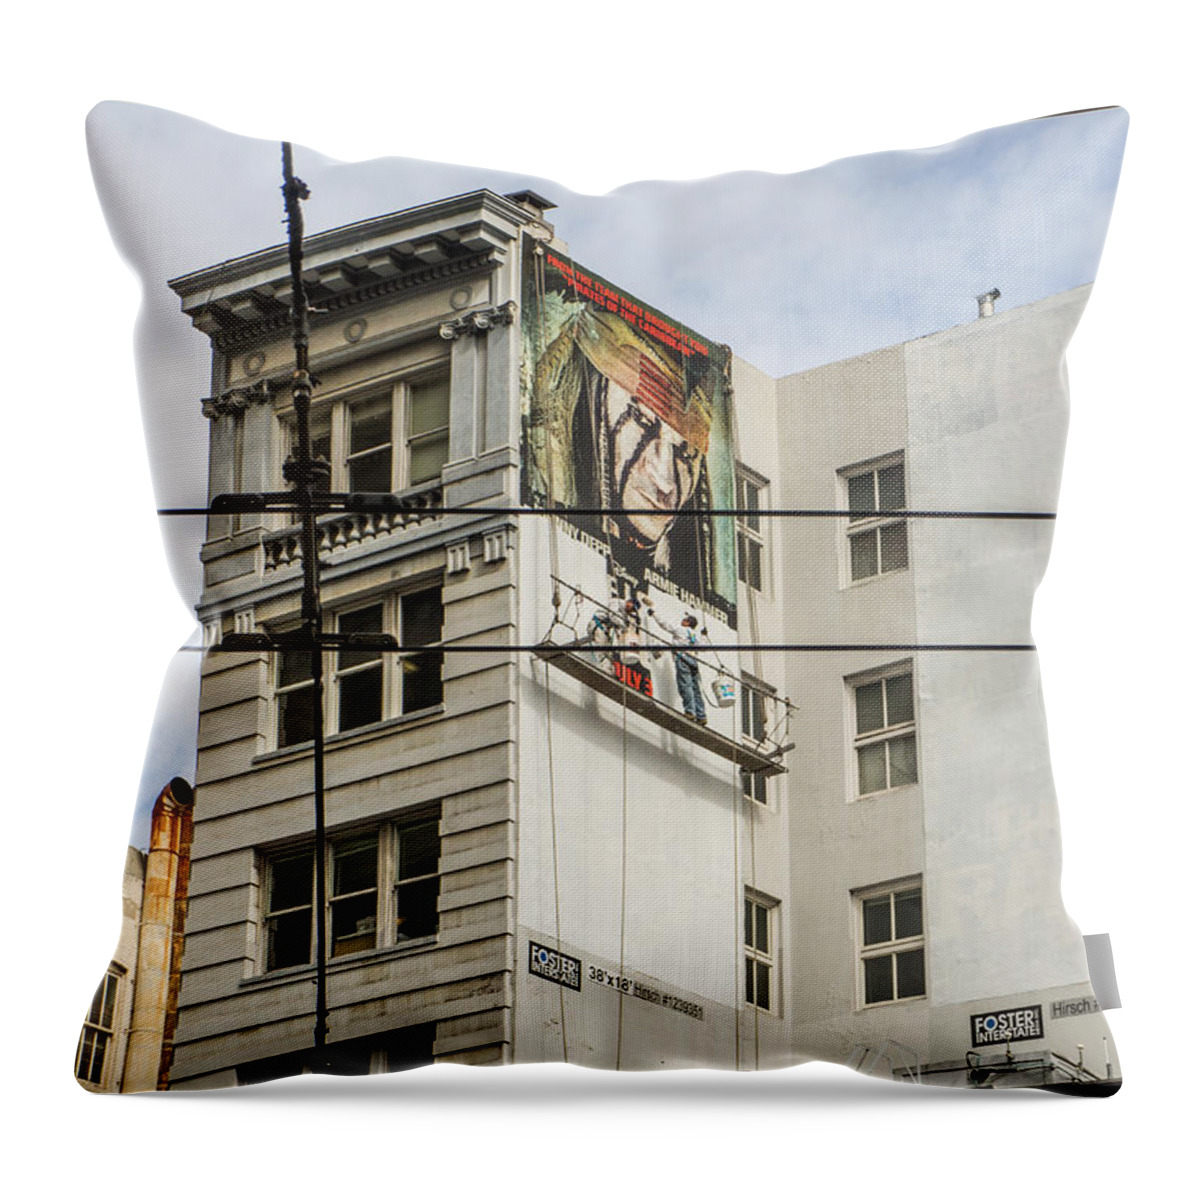 Sf Moma Throw Pillow featuring the photograph There goes Johnny by Weir Here And There